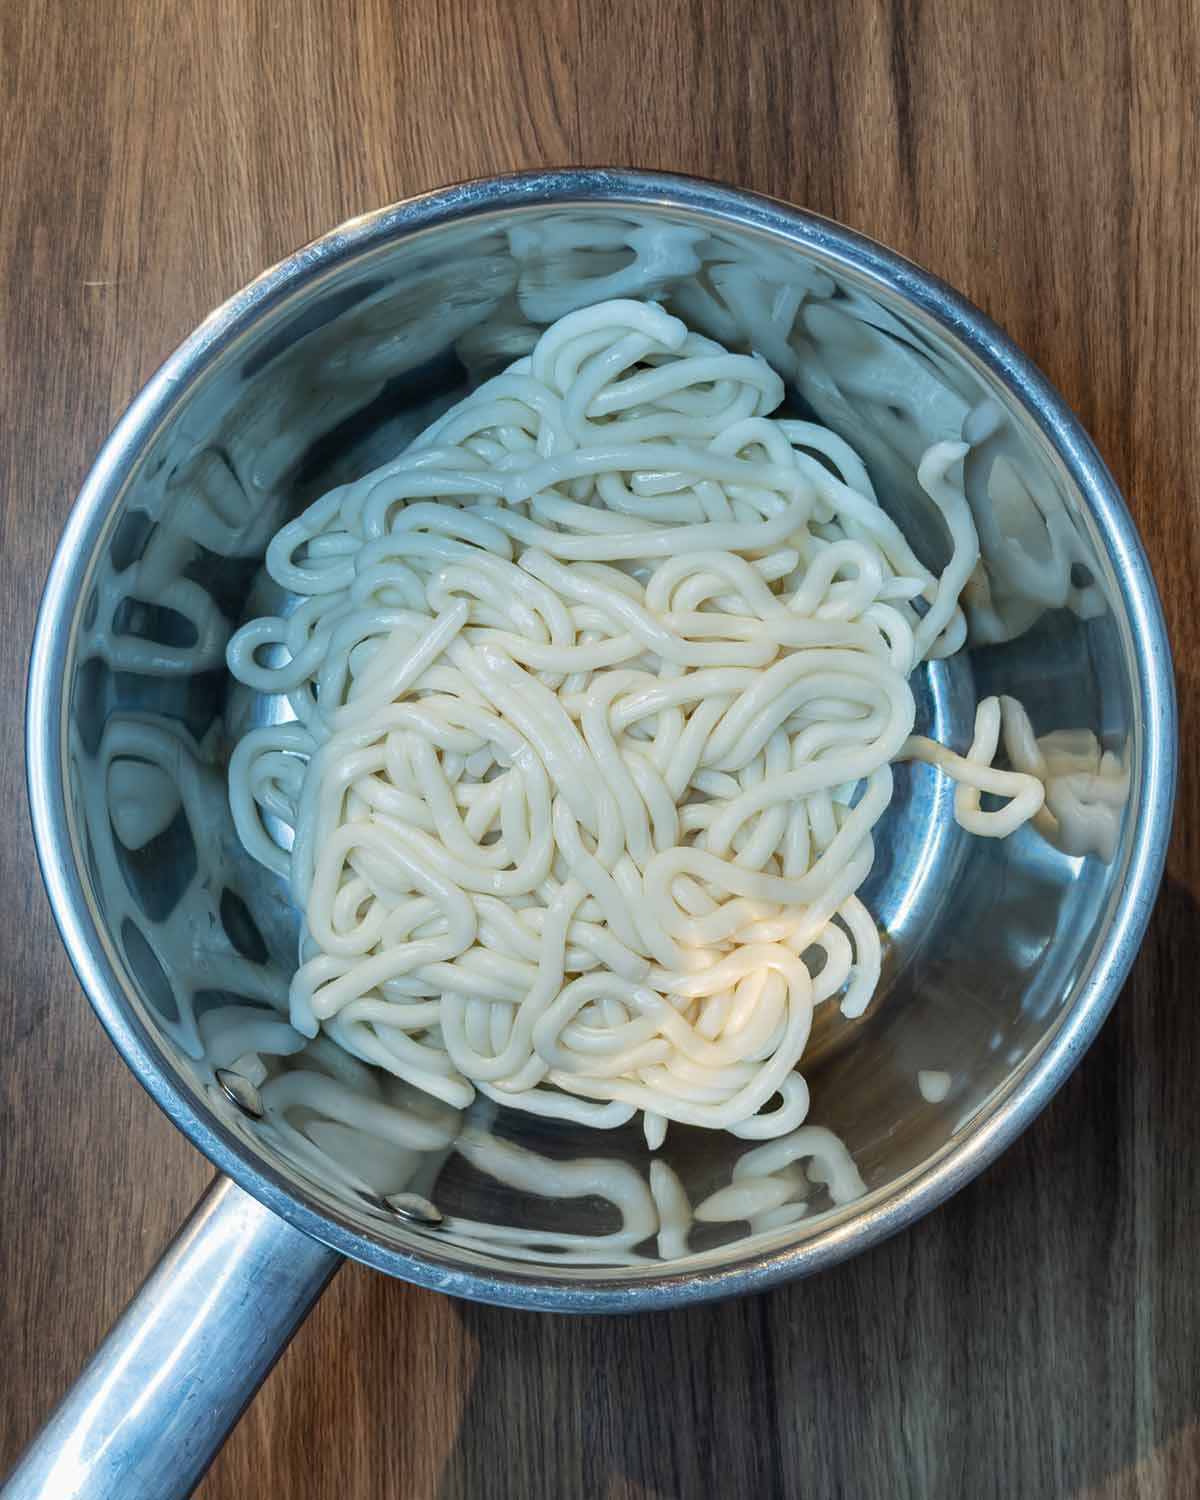 Uncooked udon noodles in a saucepan.